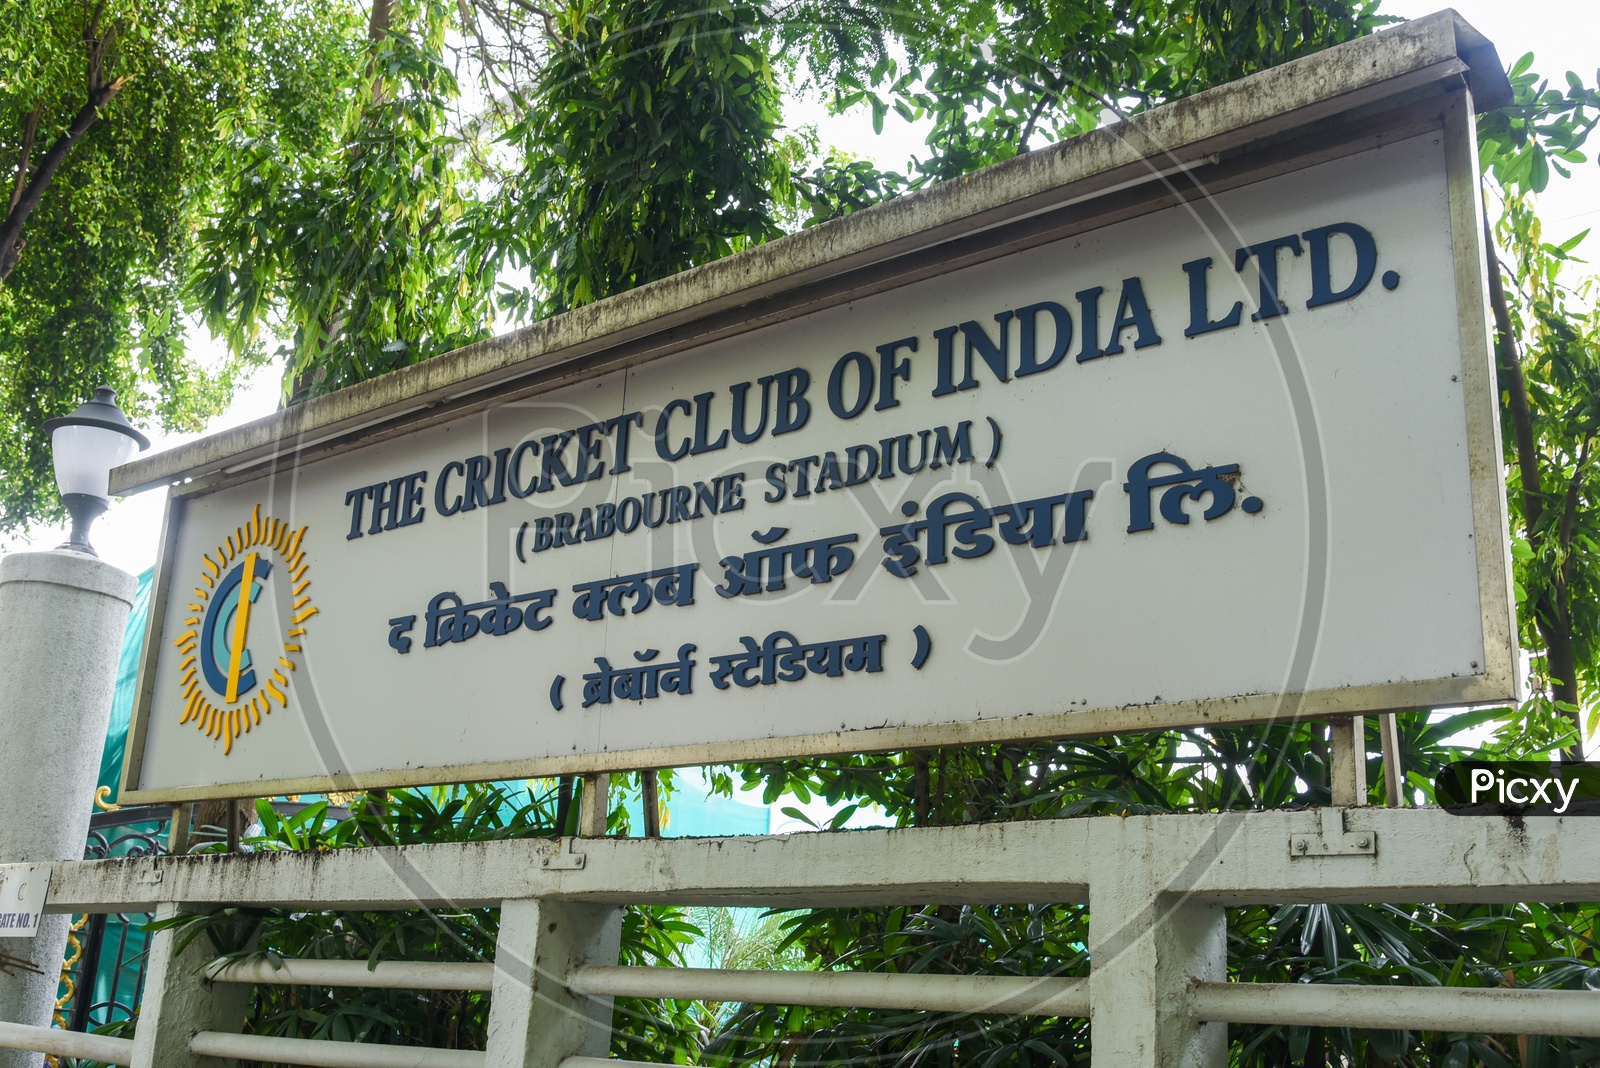 The Cricket Club of India